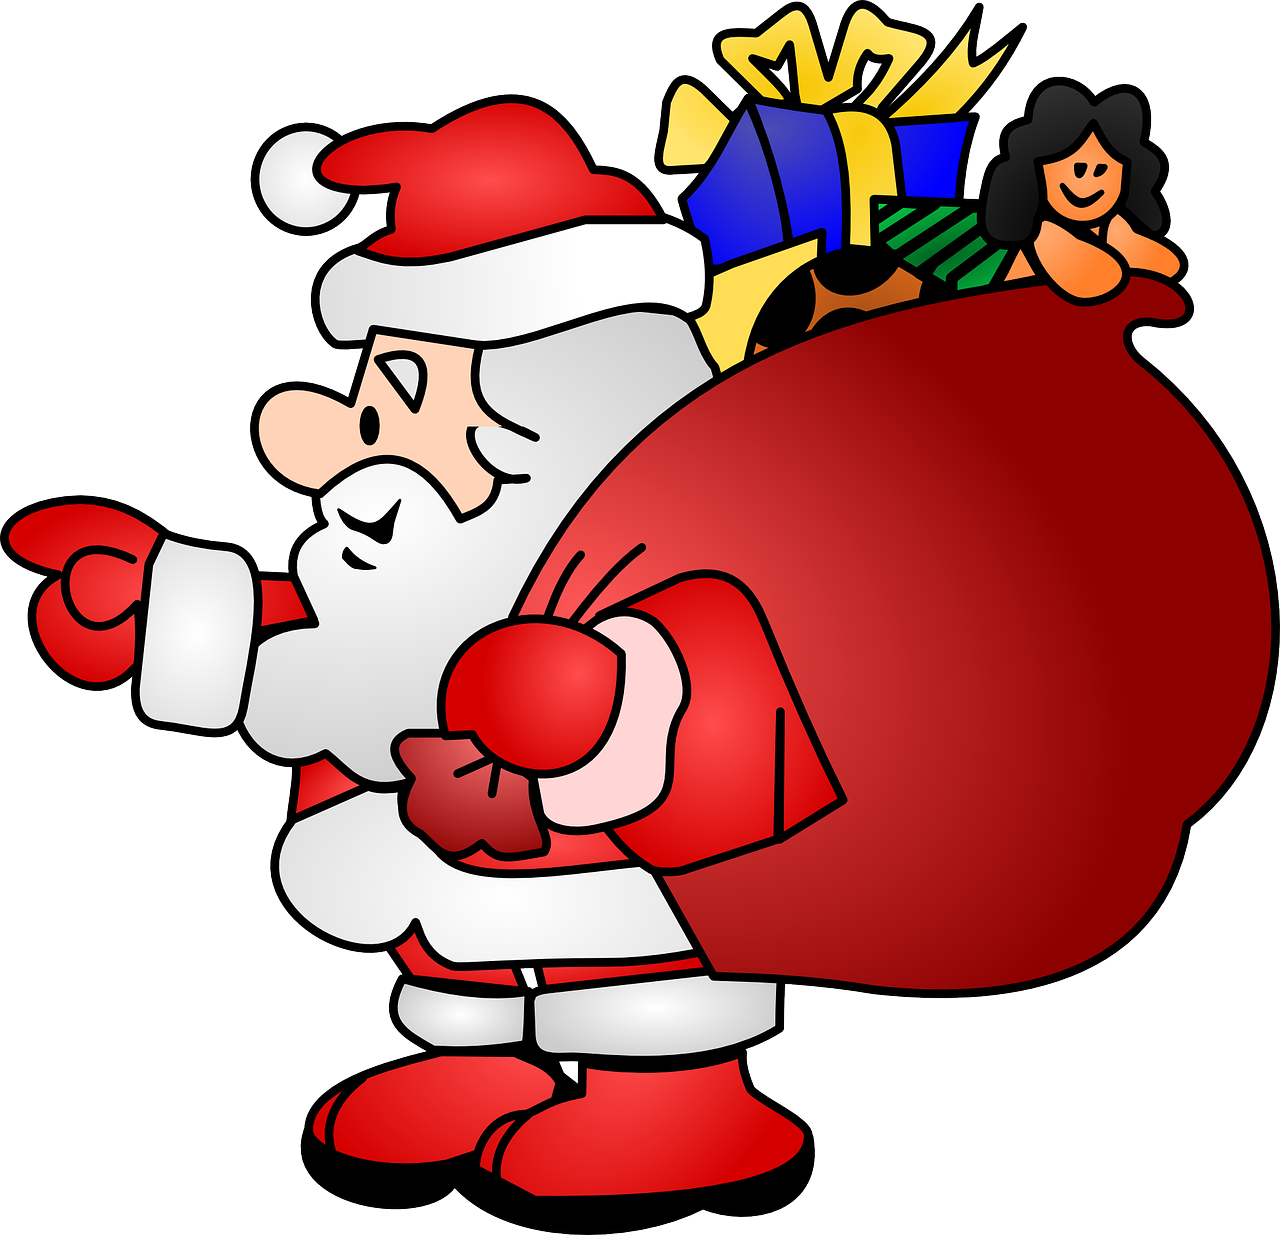 Illustration of Santa Claus with bag of wrapped presents on his back